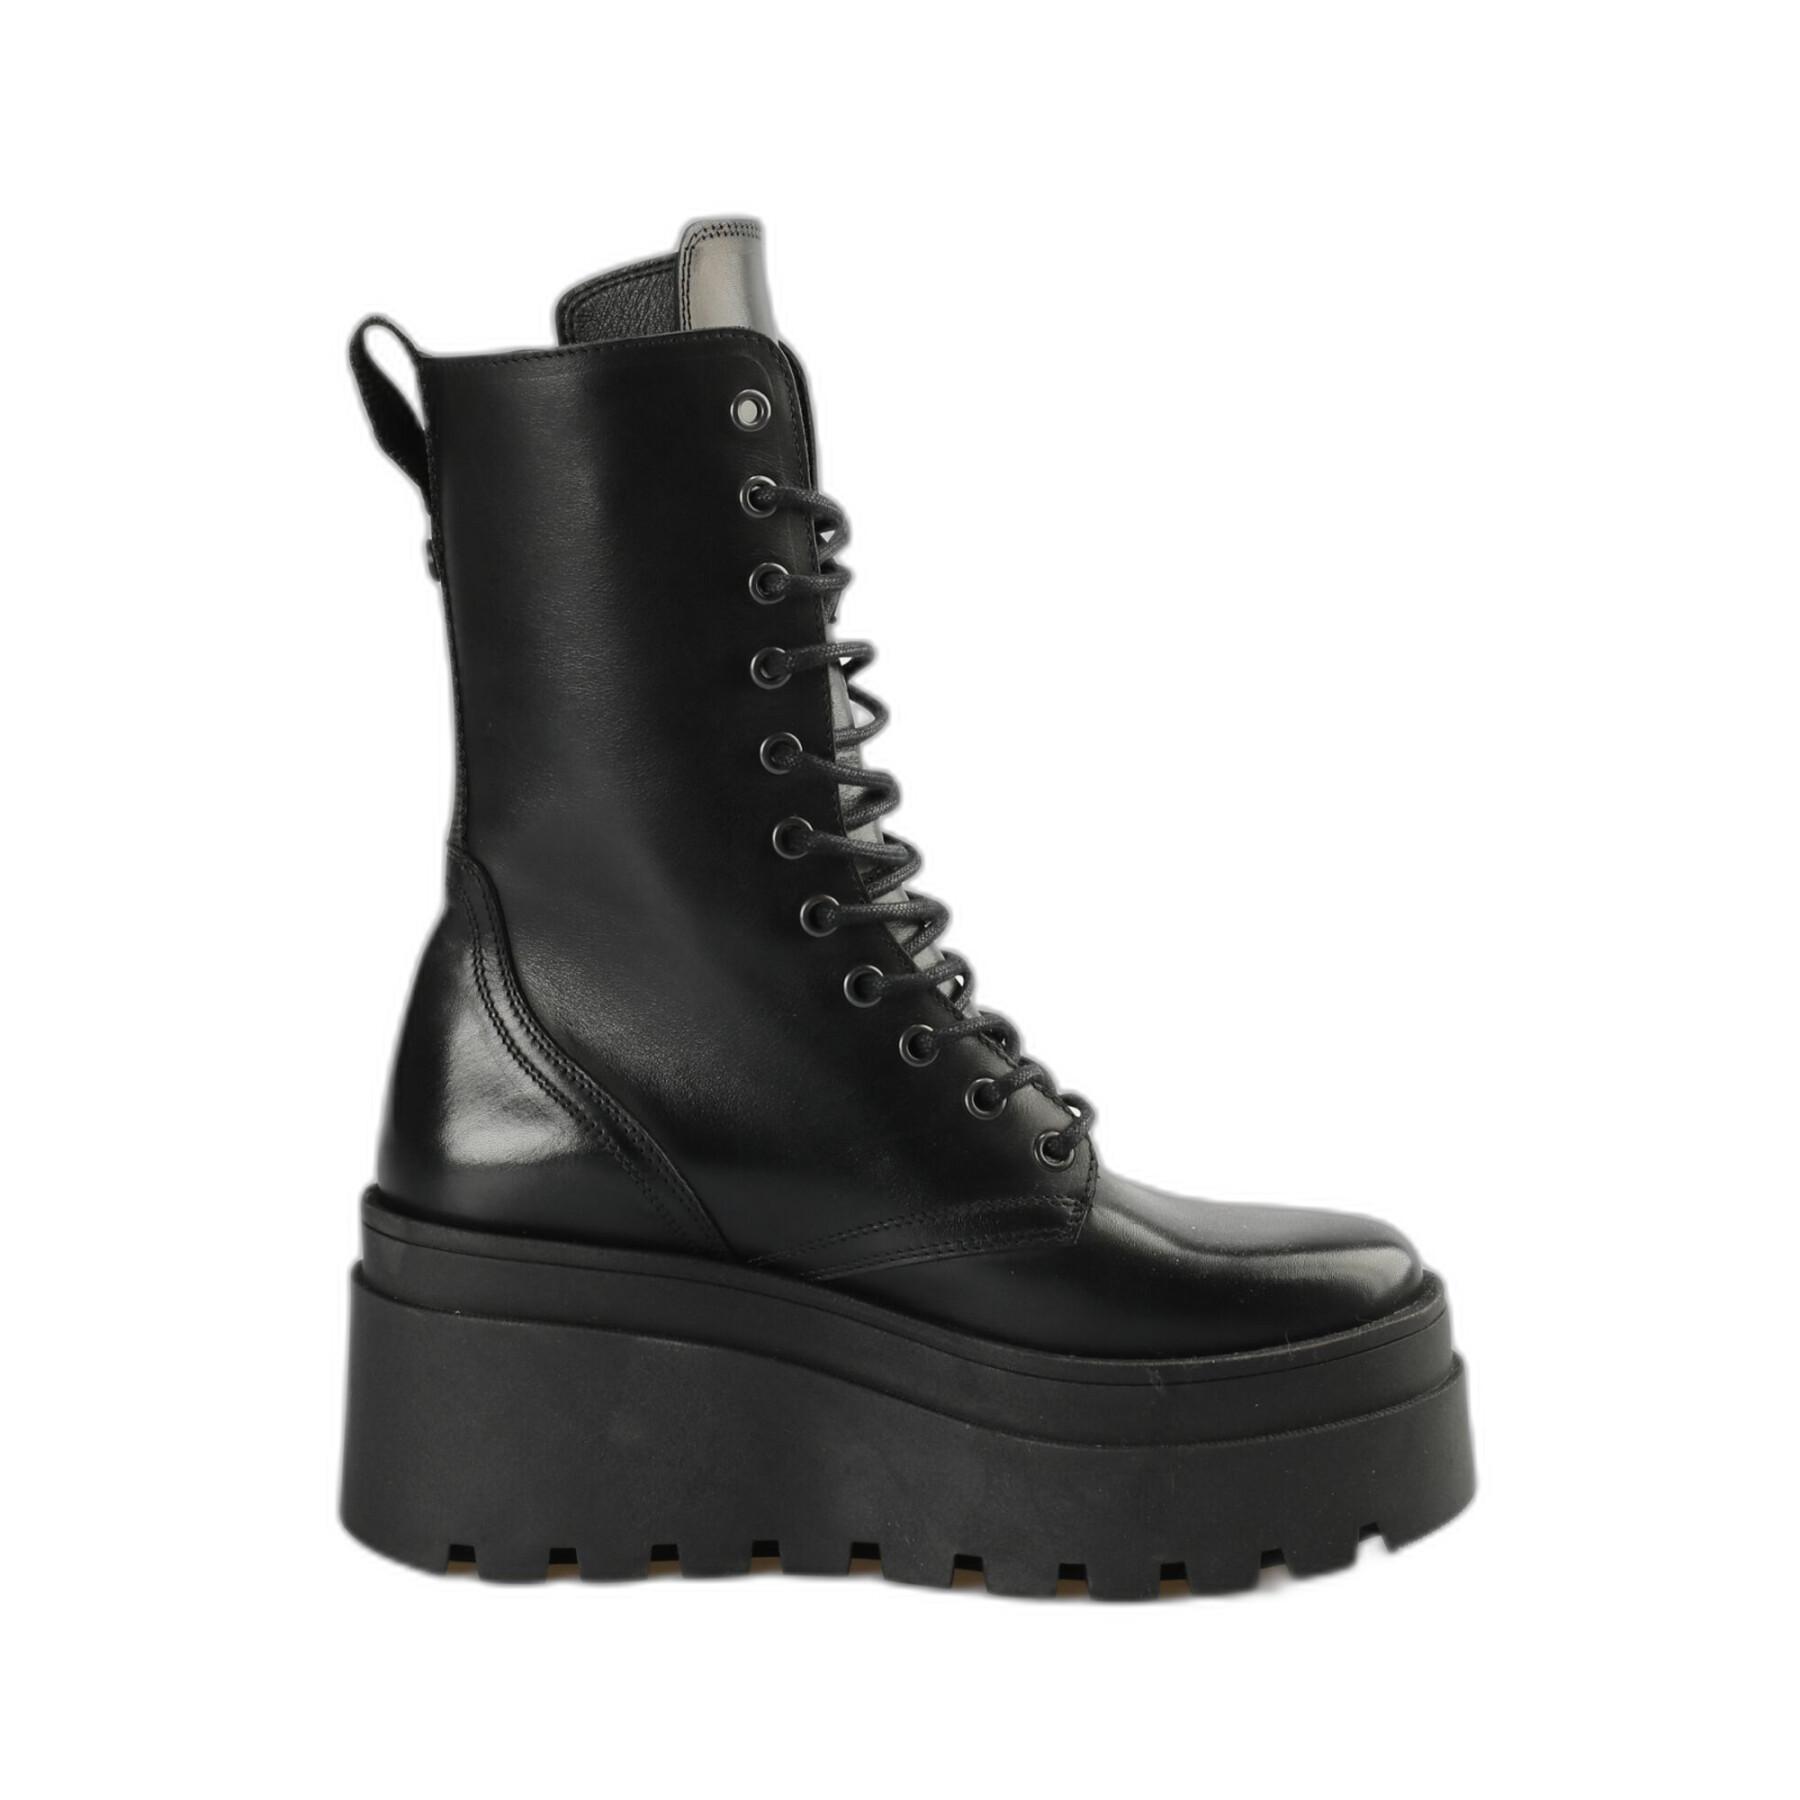 Patent leather ankle boots for women Buffalo Lift